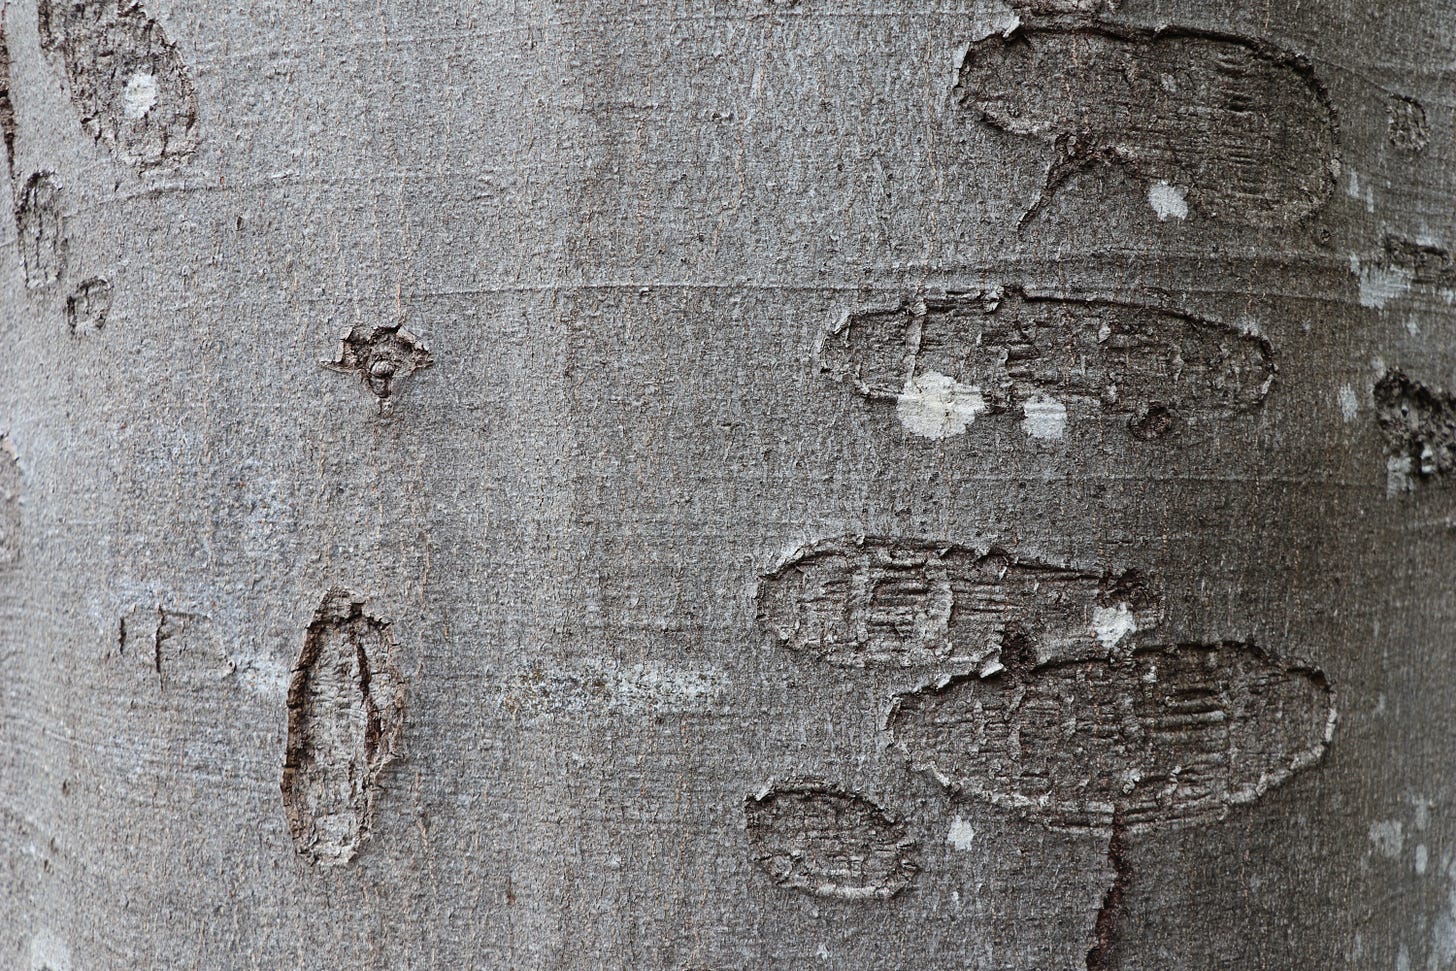 Grey, smooth Fagus sylvatica bark with several small round scars.